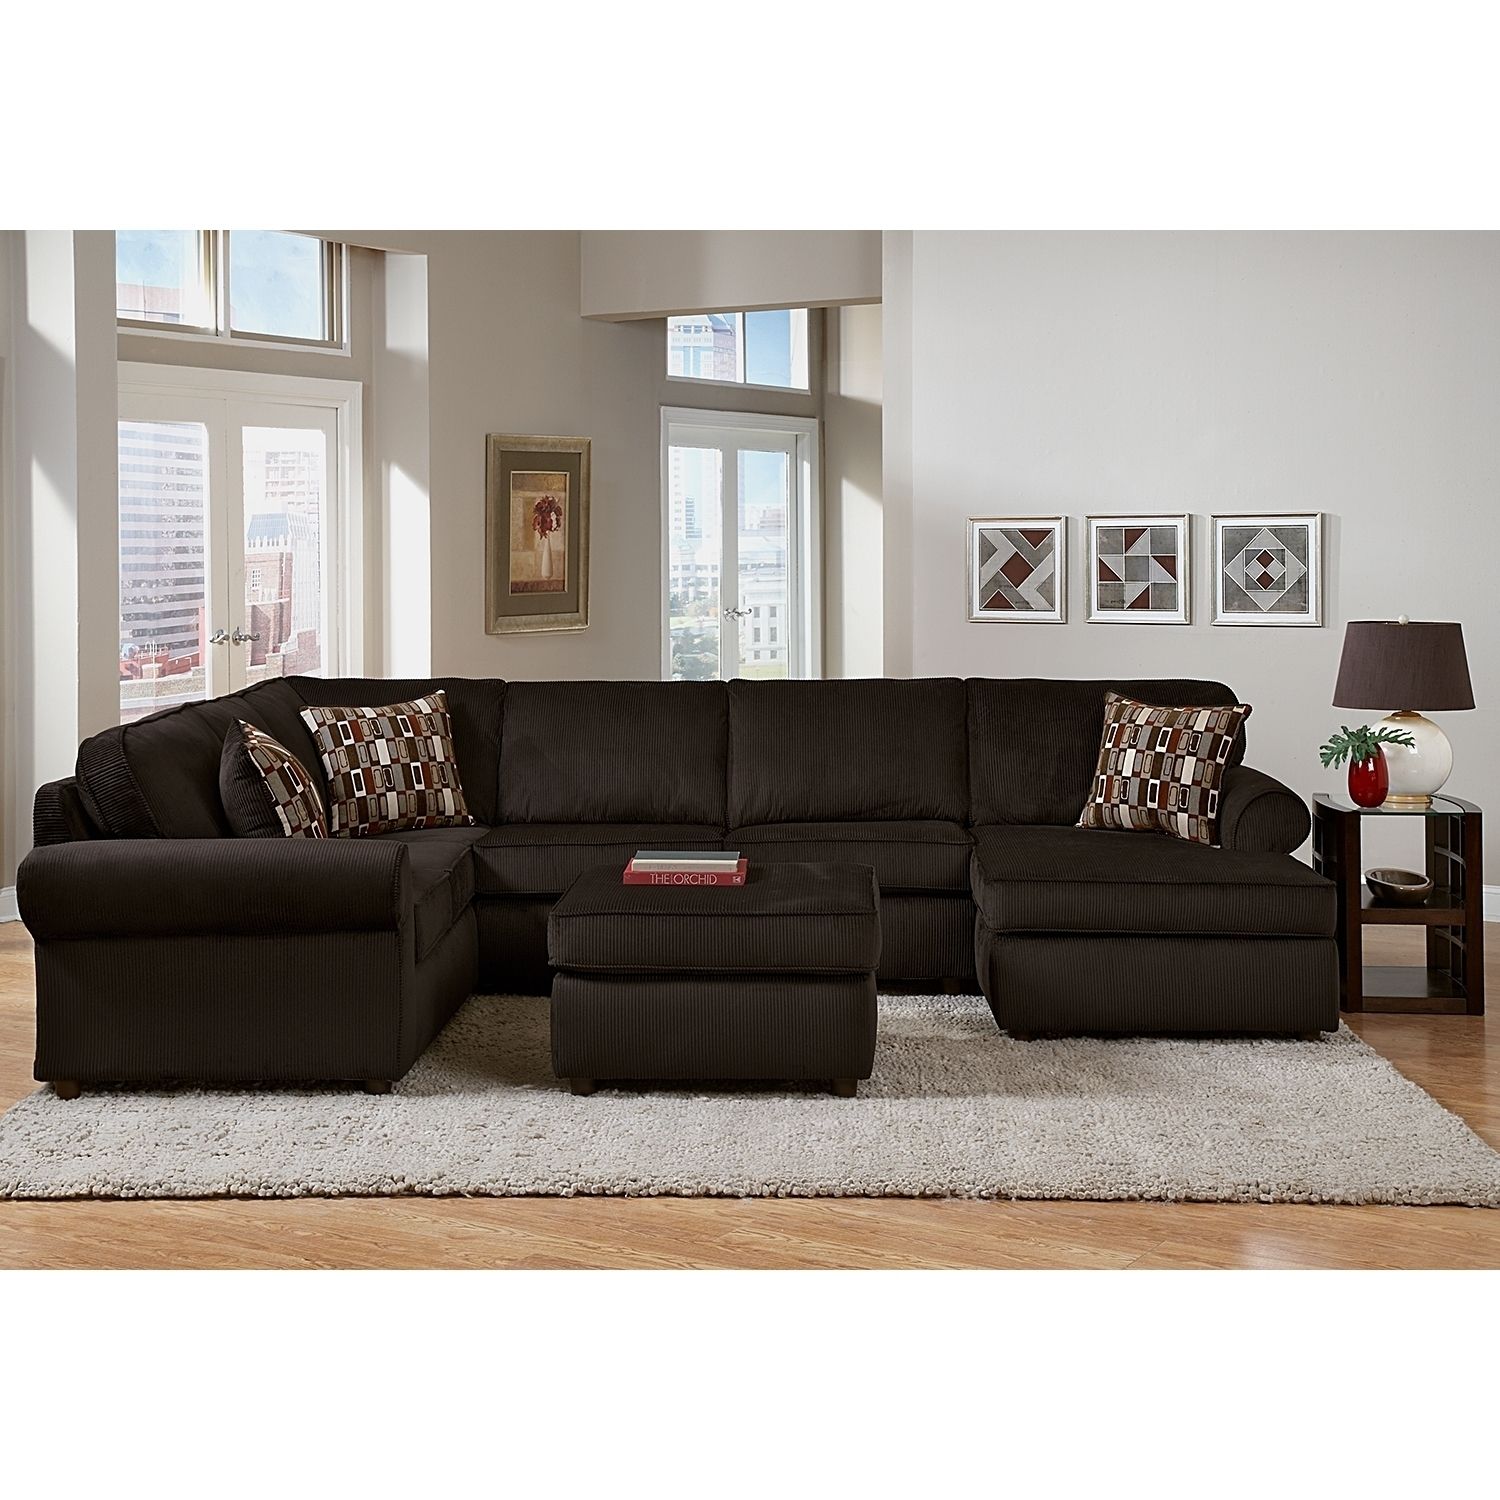 Value City Furniture Grand Rapids Mi Phone Number – Best Image Inside Grand Rapids Mi Sectional Sofas (View 4 of 10)